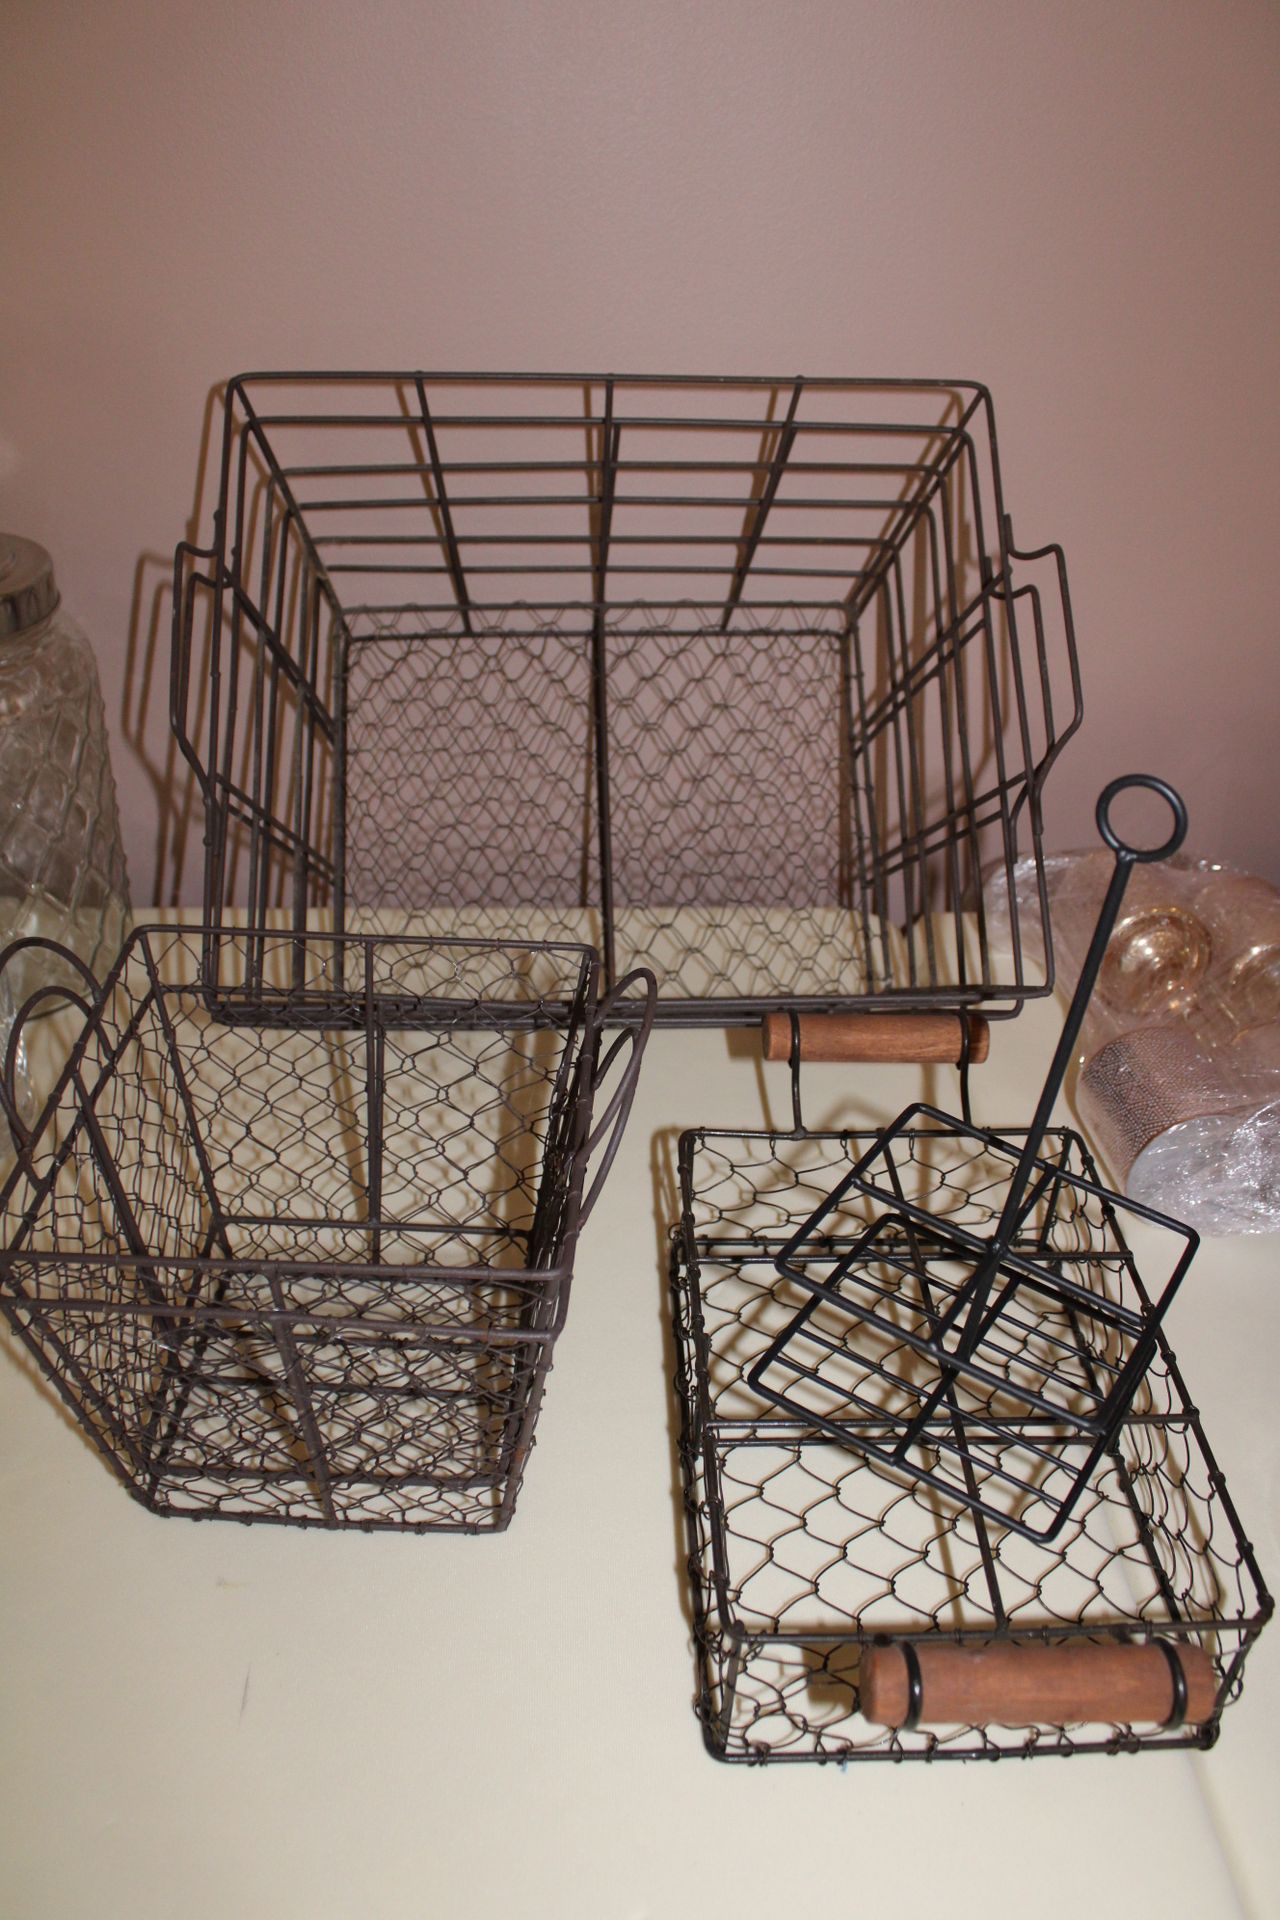 Null Six baskets, one birdcage, metal